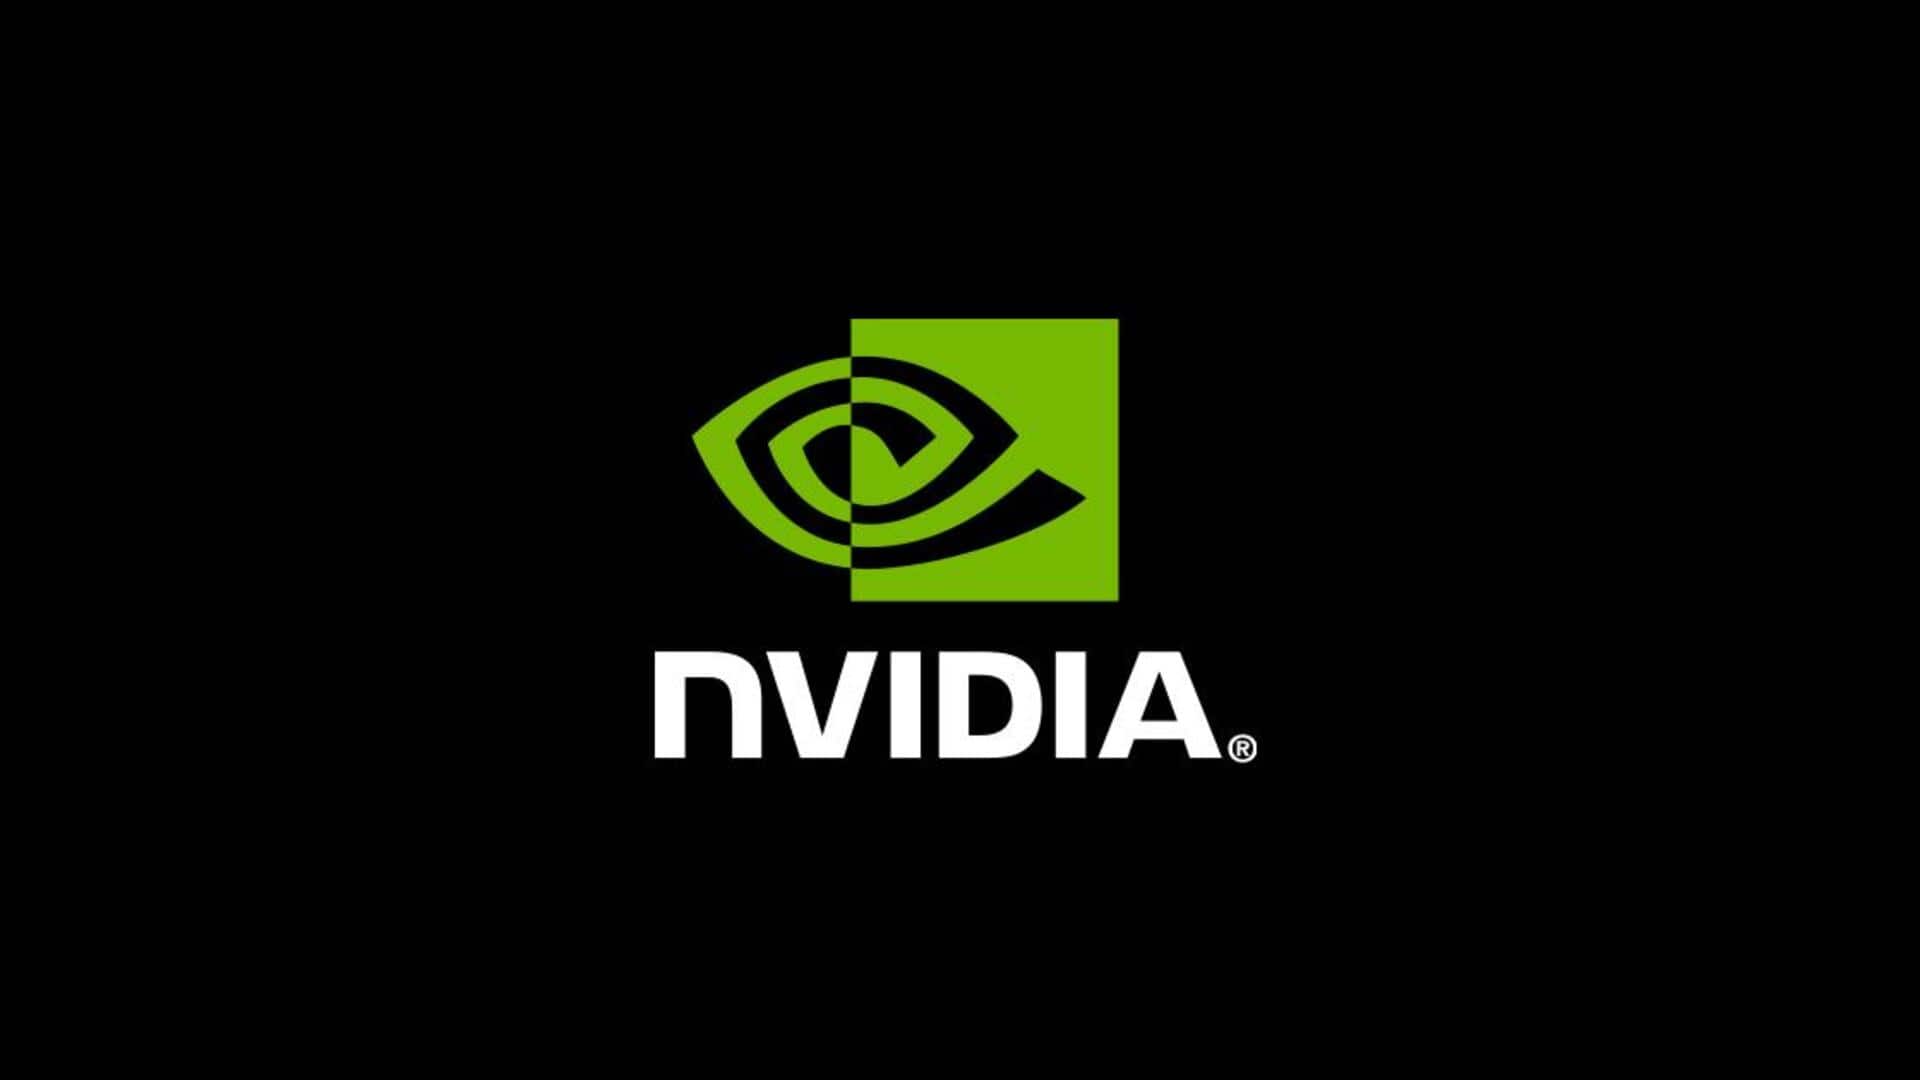 NVIDIA to launch 3 new AI chips for Chinese market